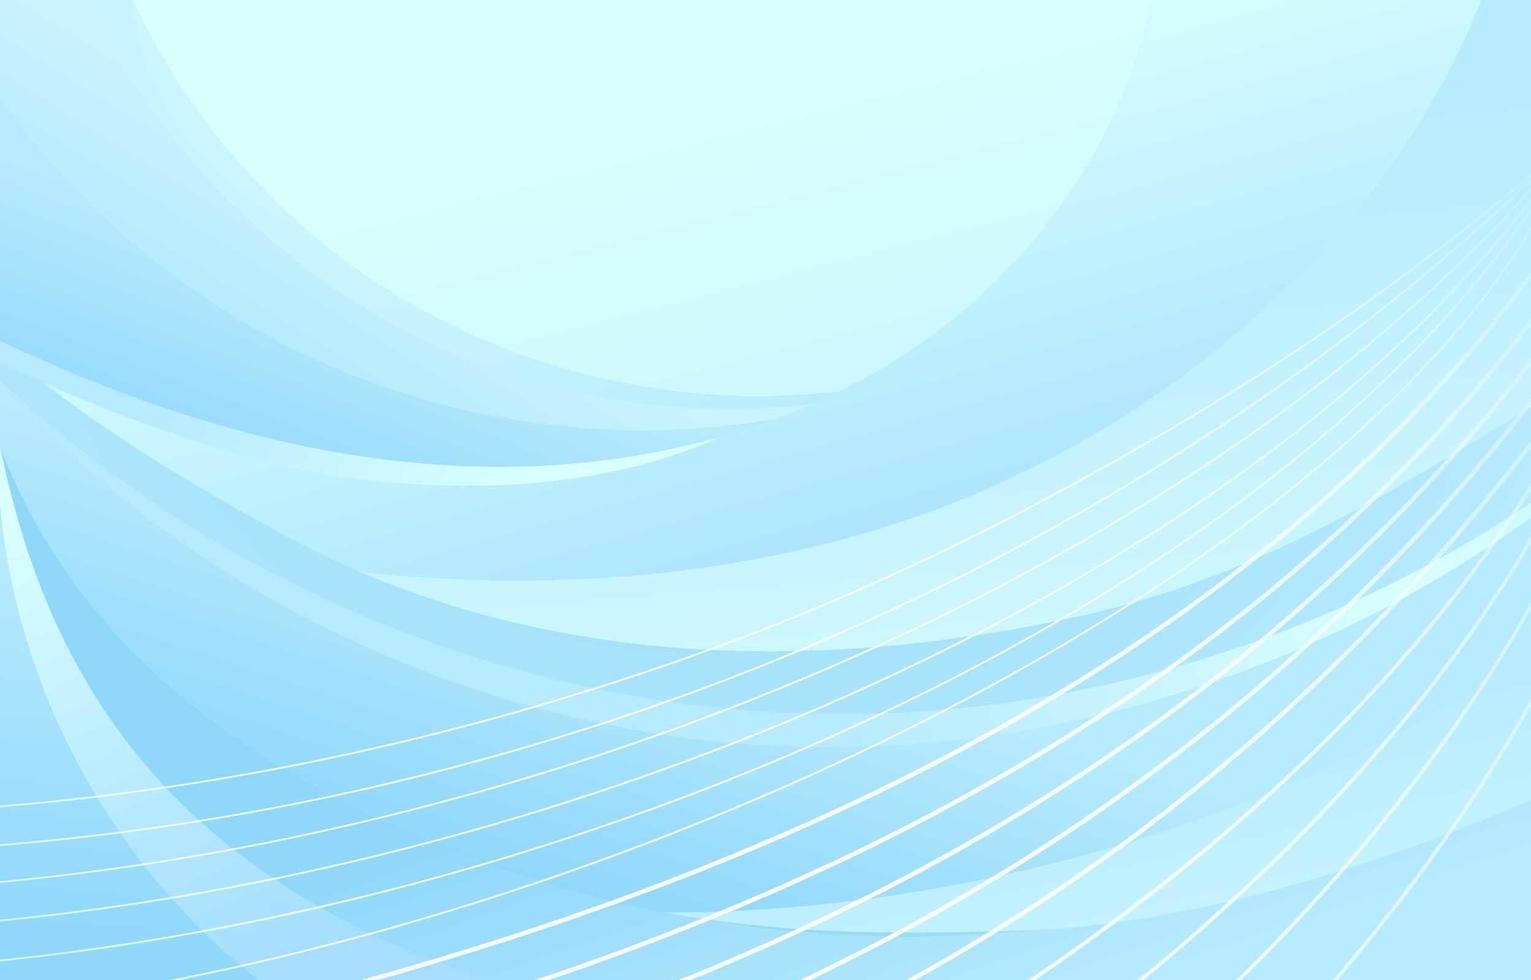 Abstract Blue Wavy Background vector